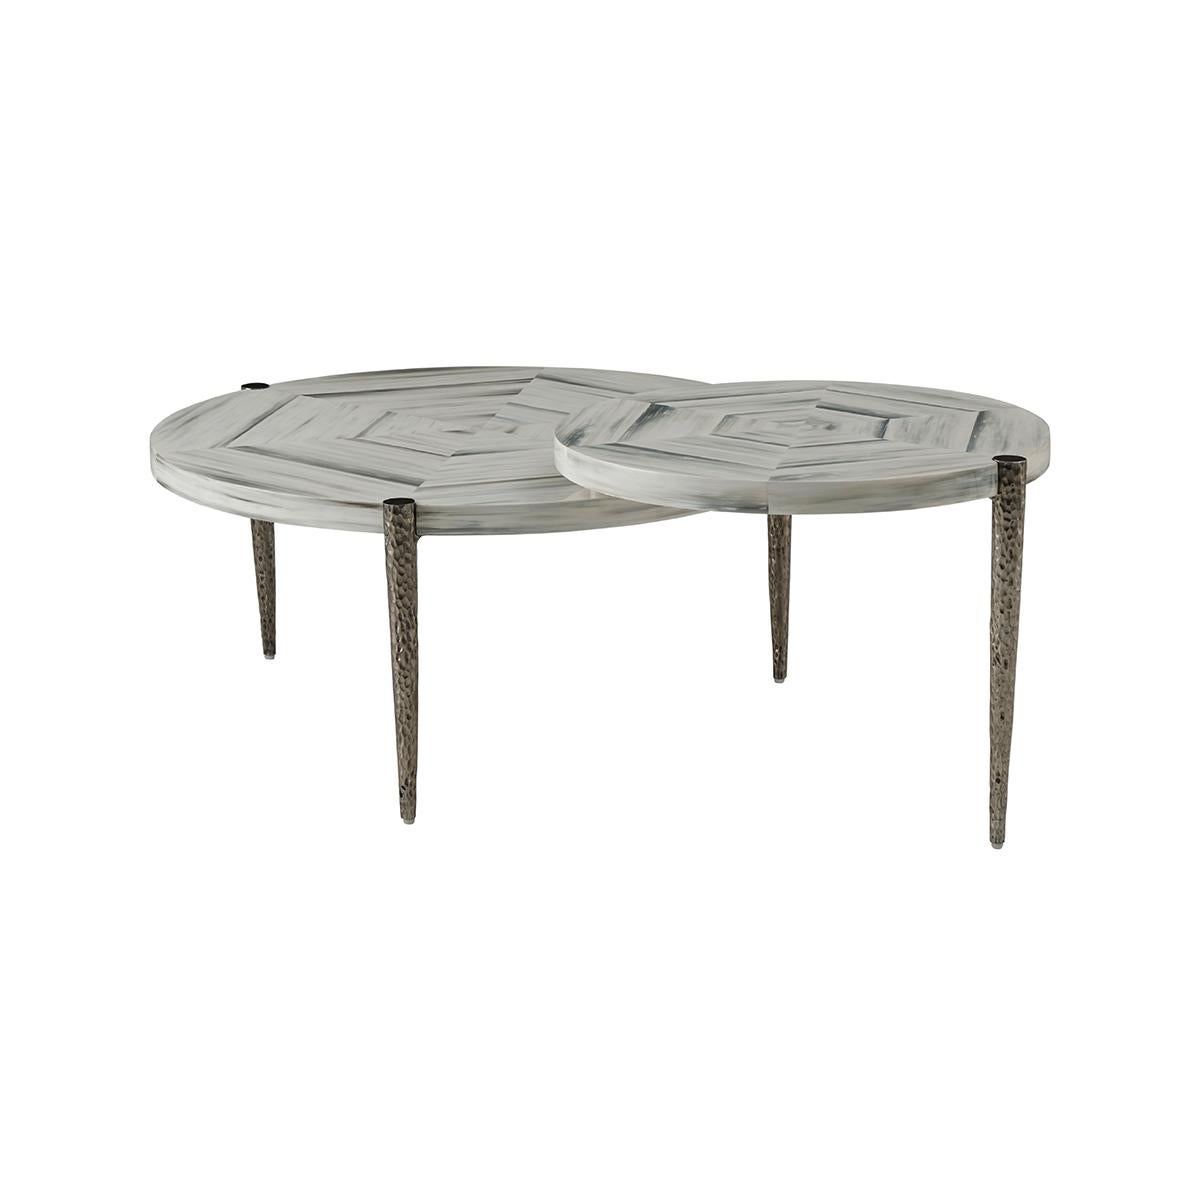 Two hand-painted faux horn rayed symmetrical tops with natural cast textured hammered metal bases. This cocktail table is sure to become the focal point of any living room.

Dimensions: 50